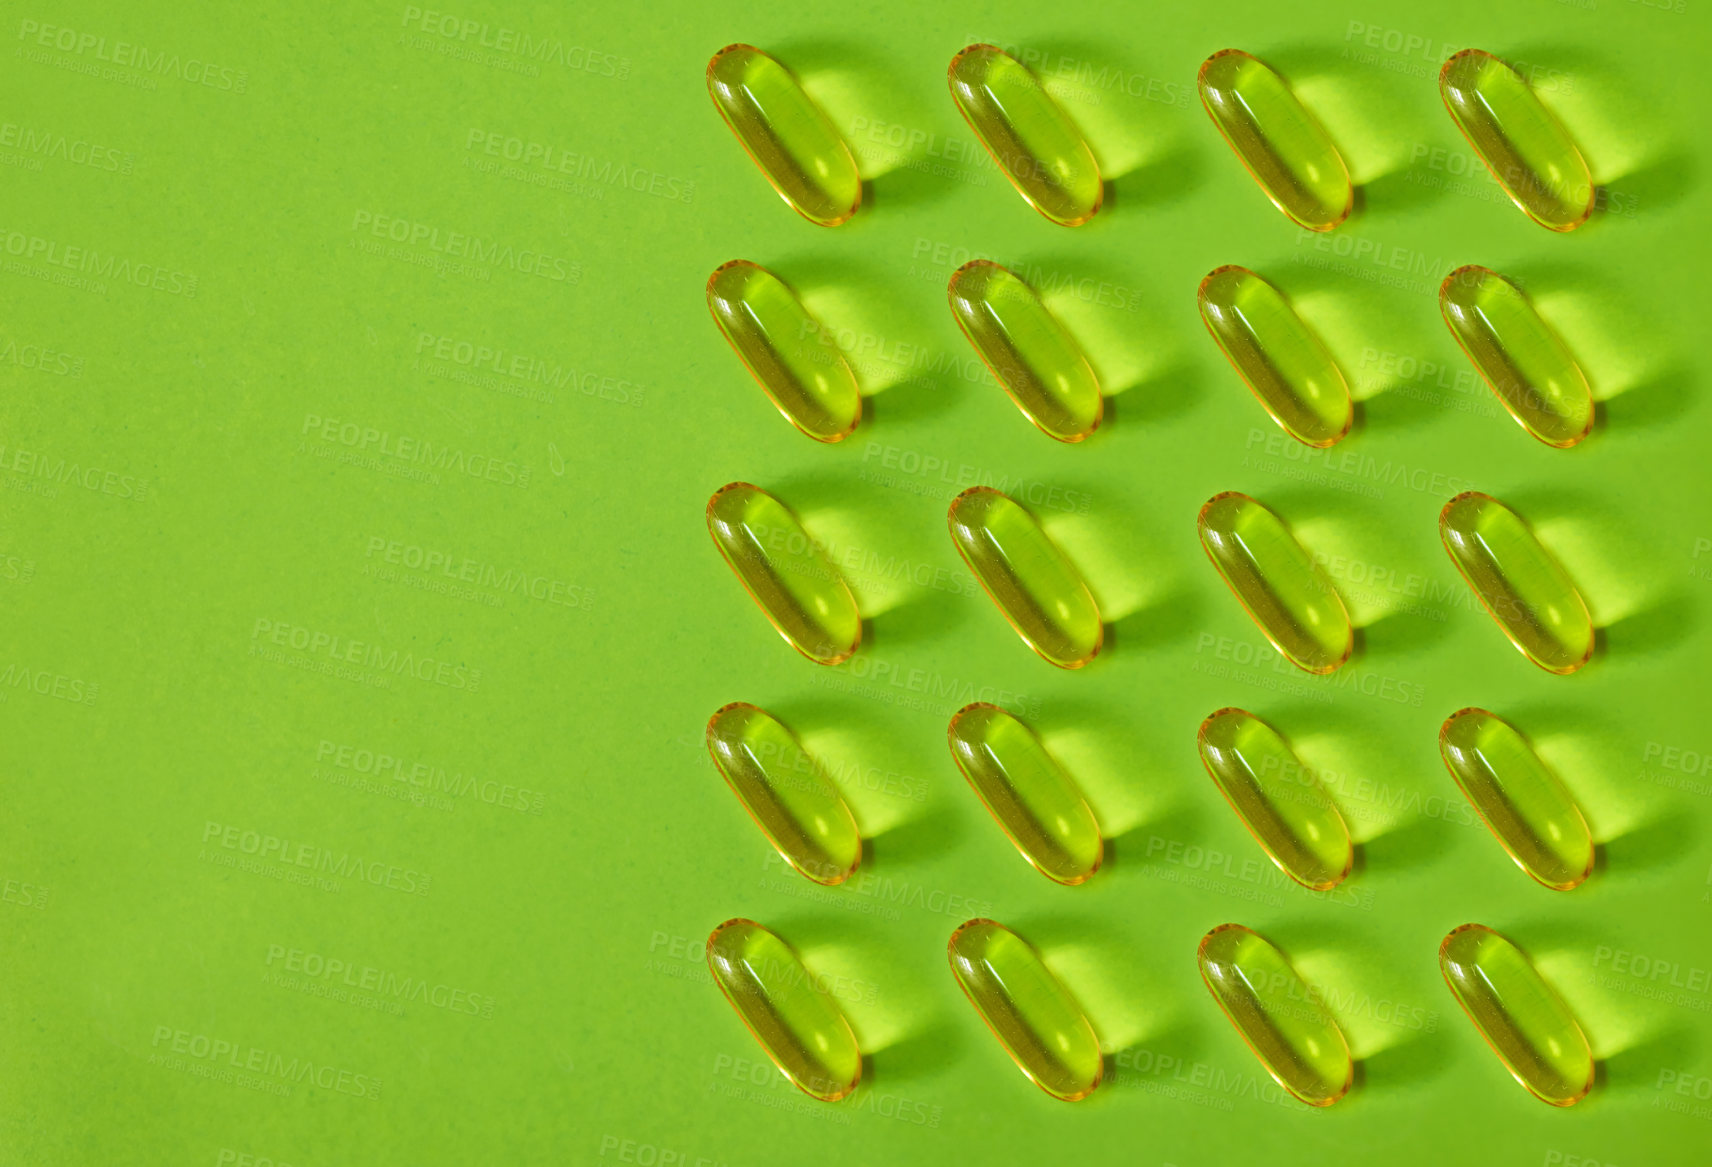 Buy stock photo Studio shot of gel capsules against a green background